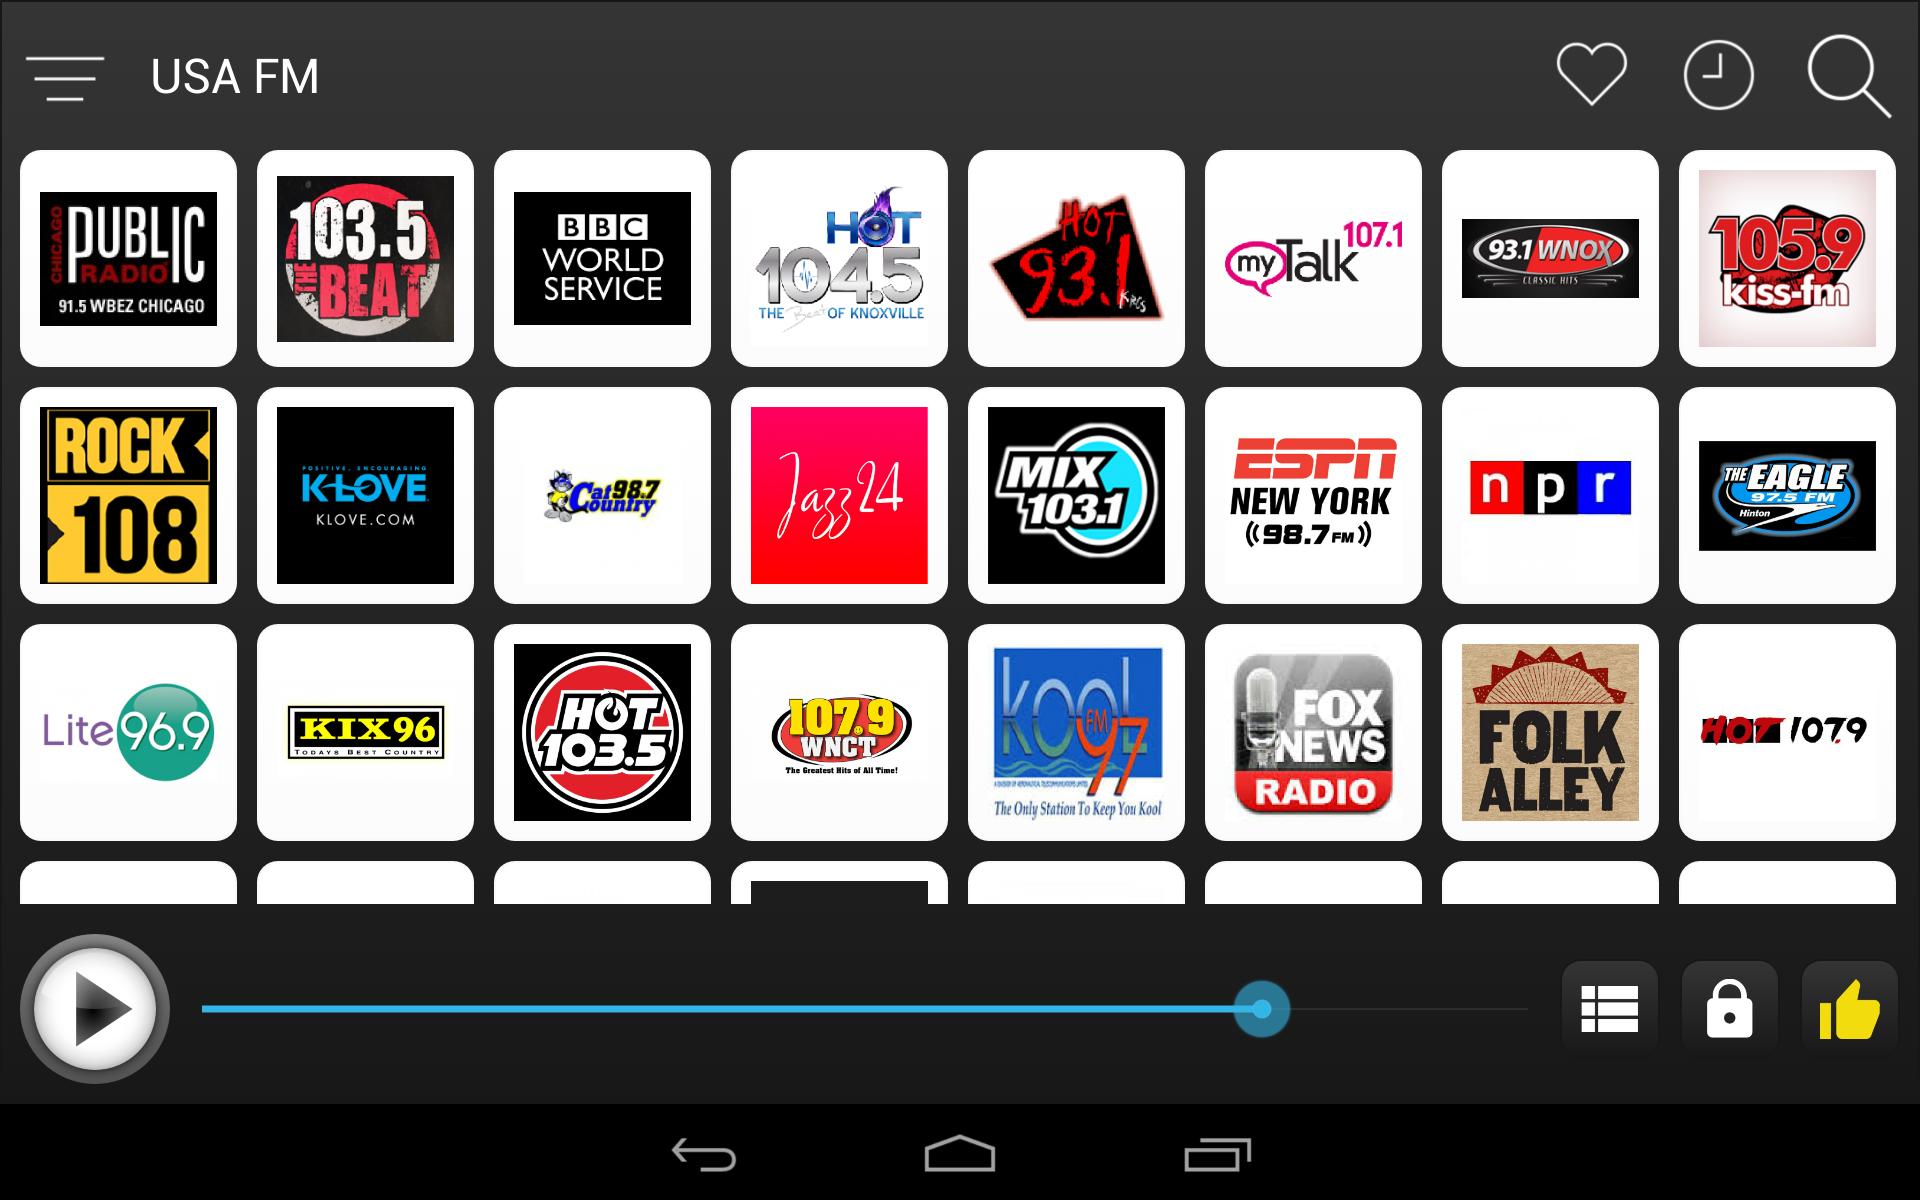 USA Radio - America Internet Online FM AM for Android - APK Download